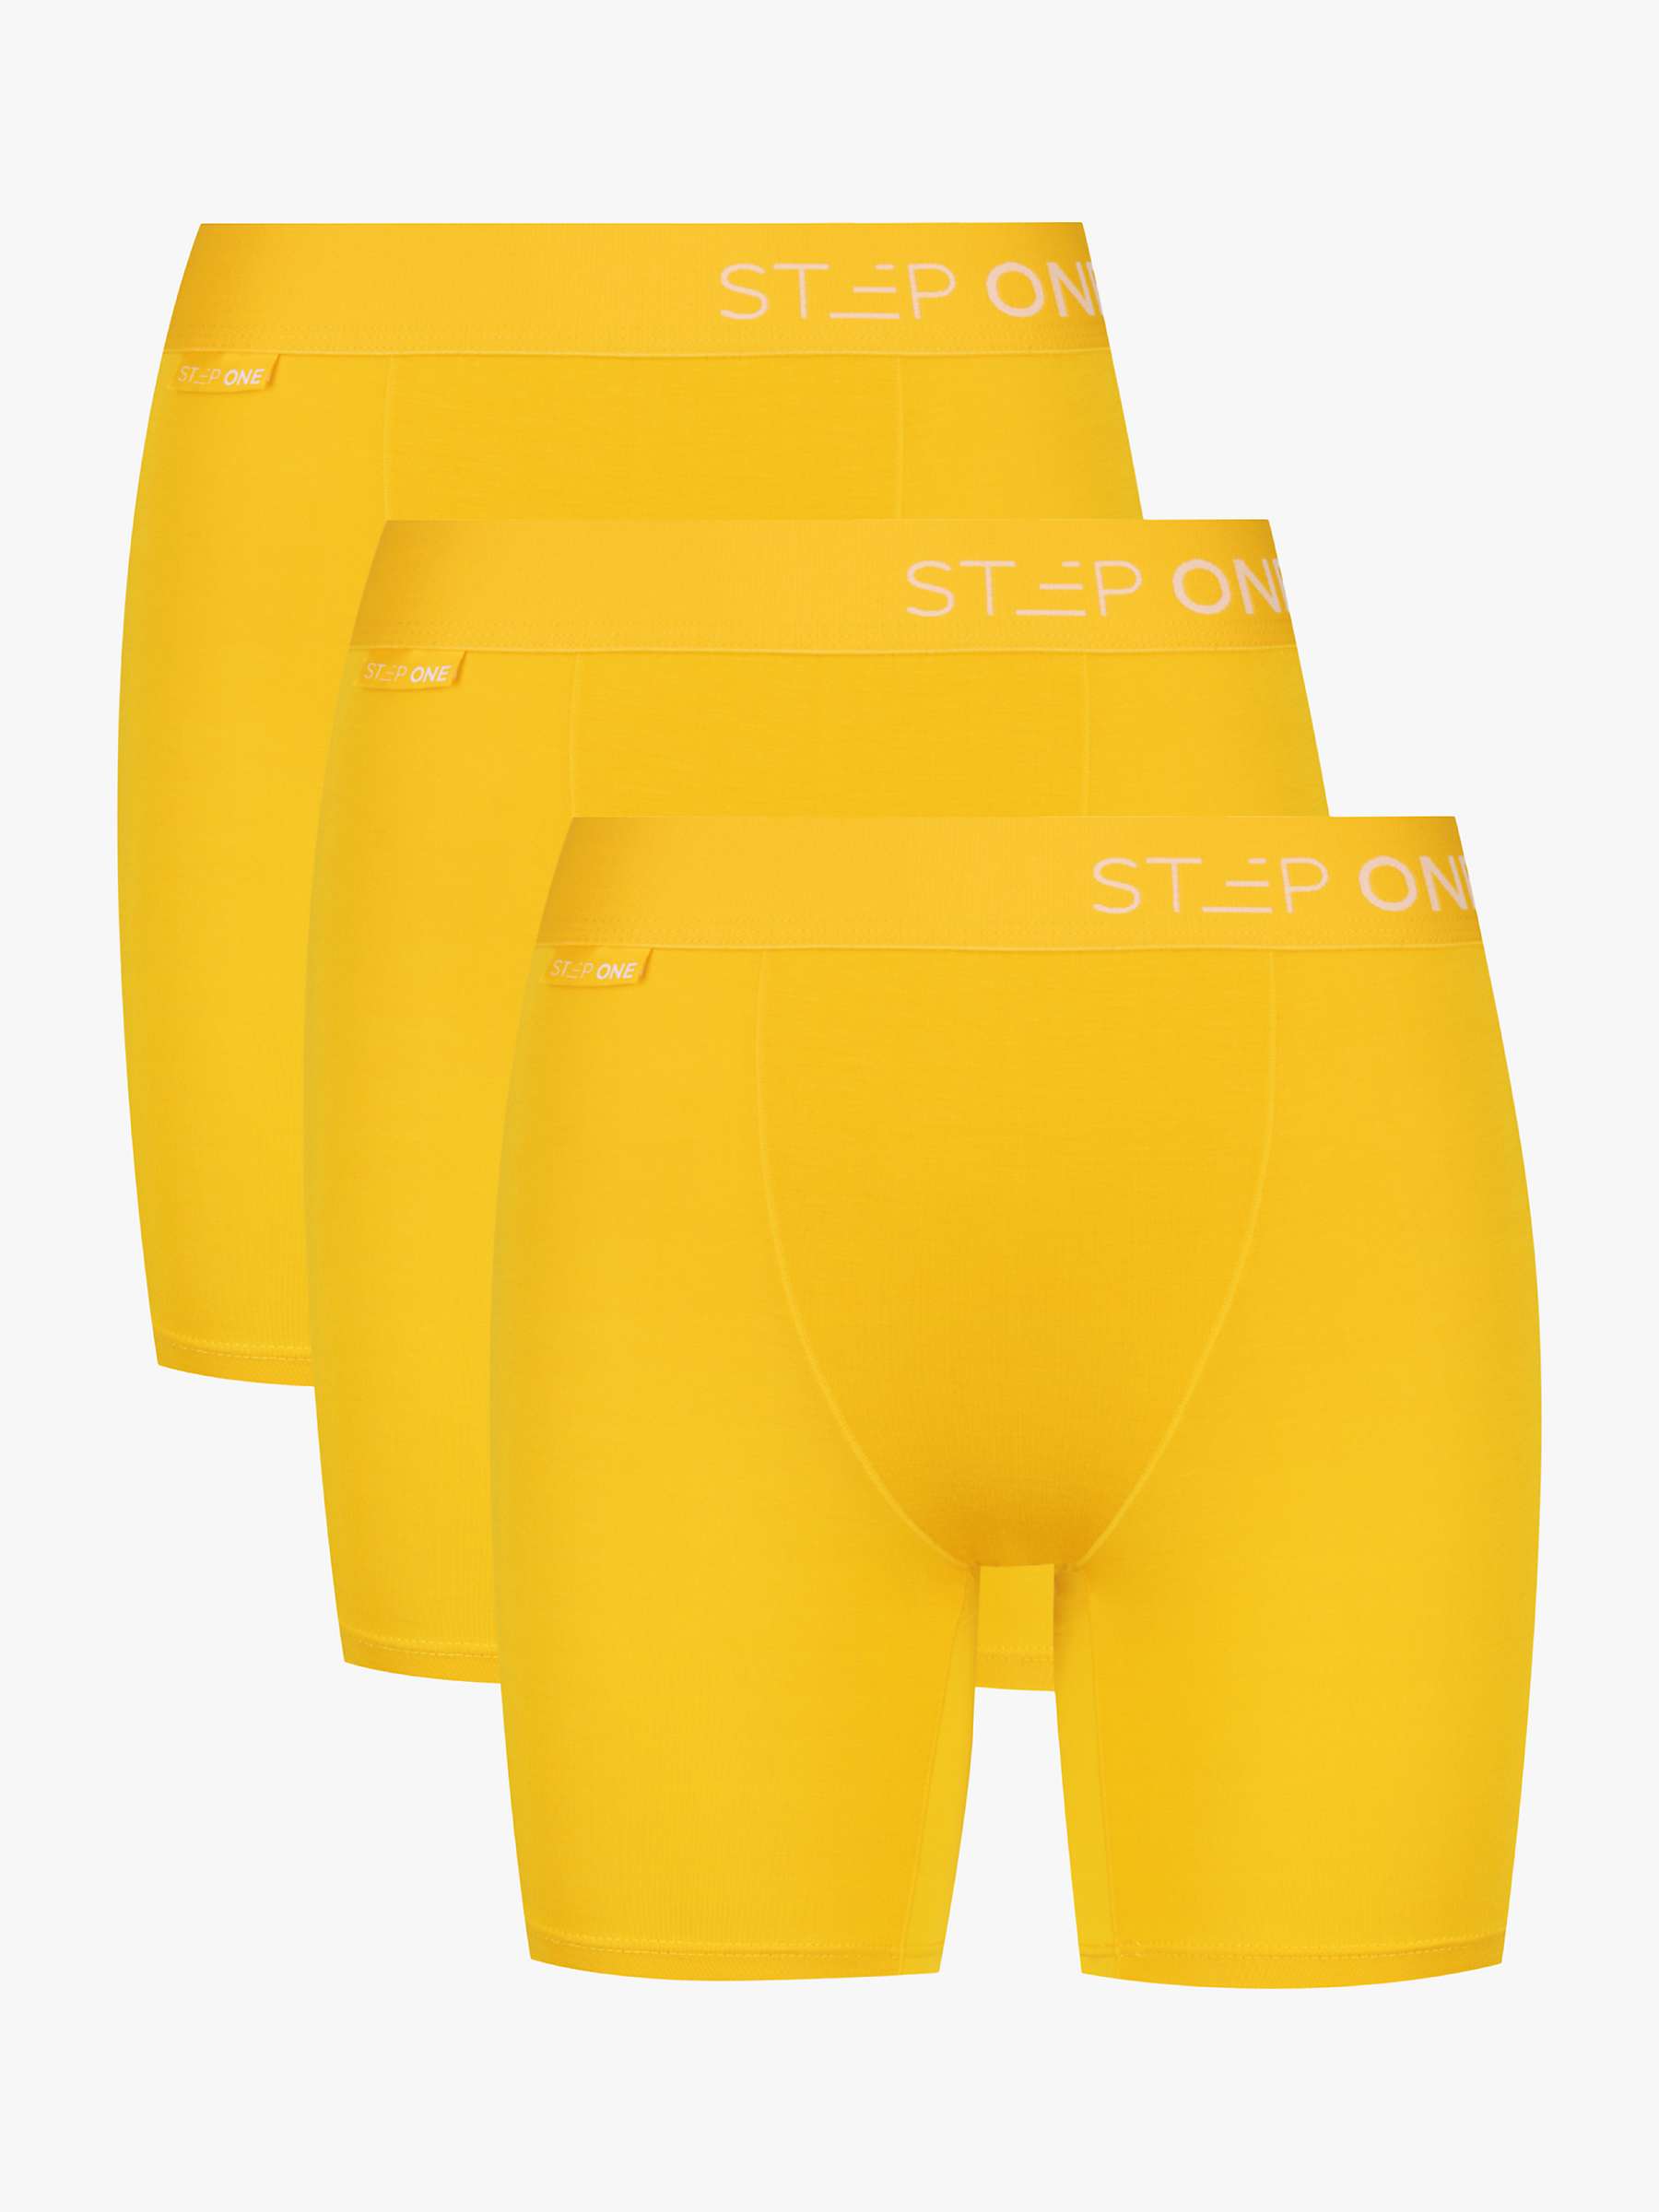 Buy Step One Bamboo Body Shorts, Pack of 3 Online at johnlewis.com